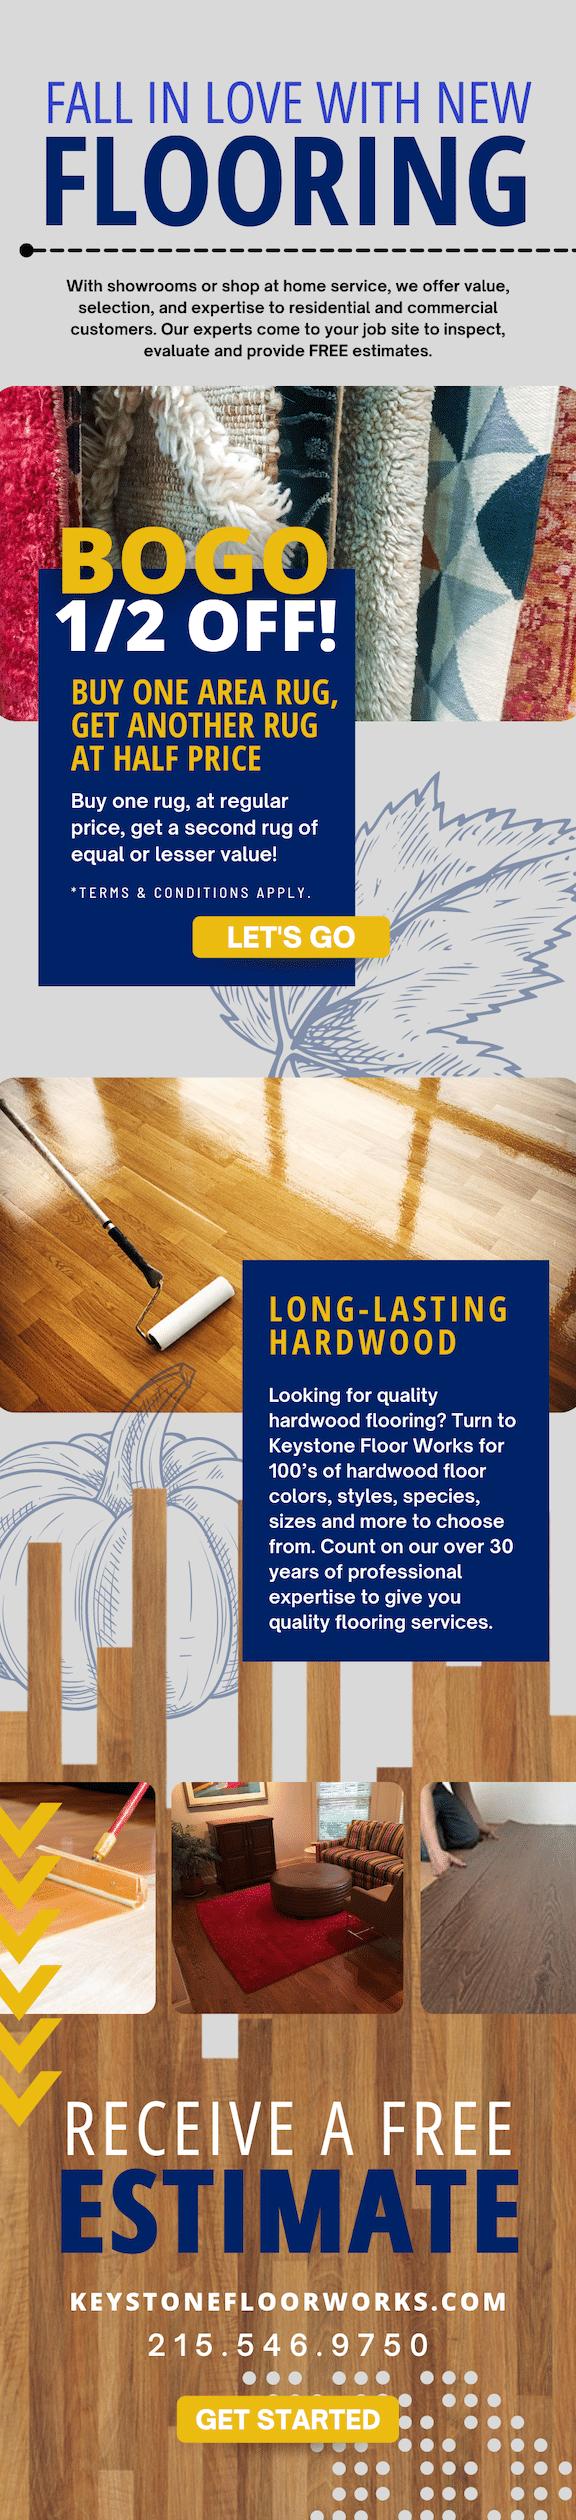 Fall In Love With New Flooring